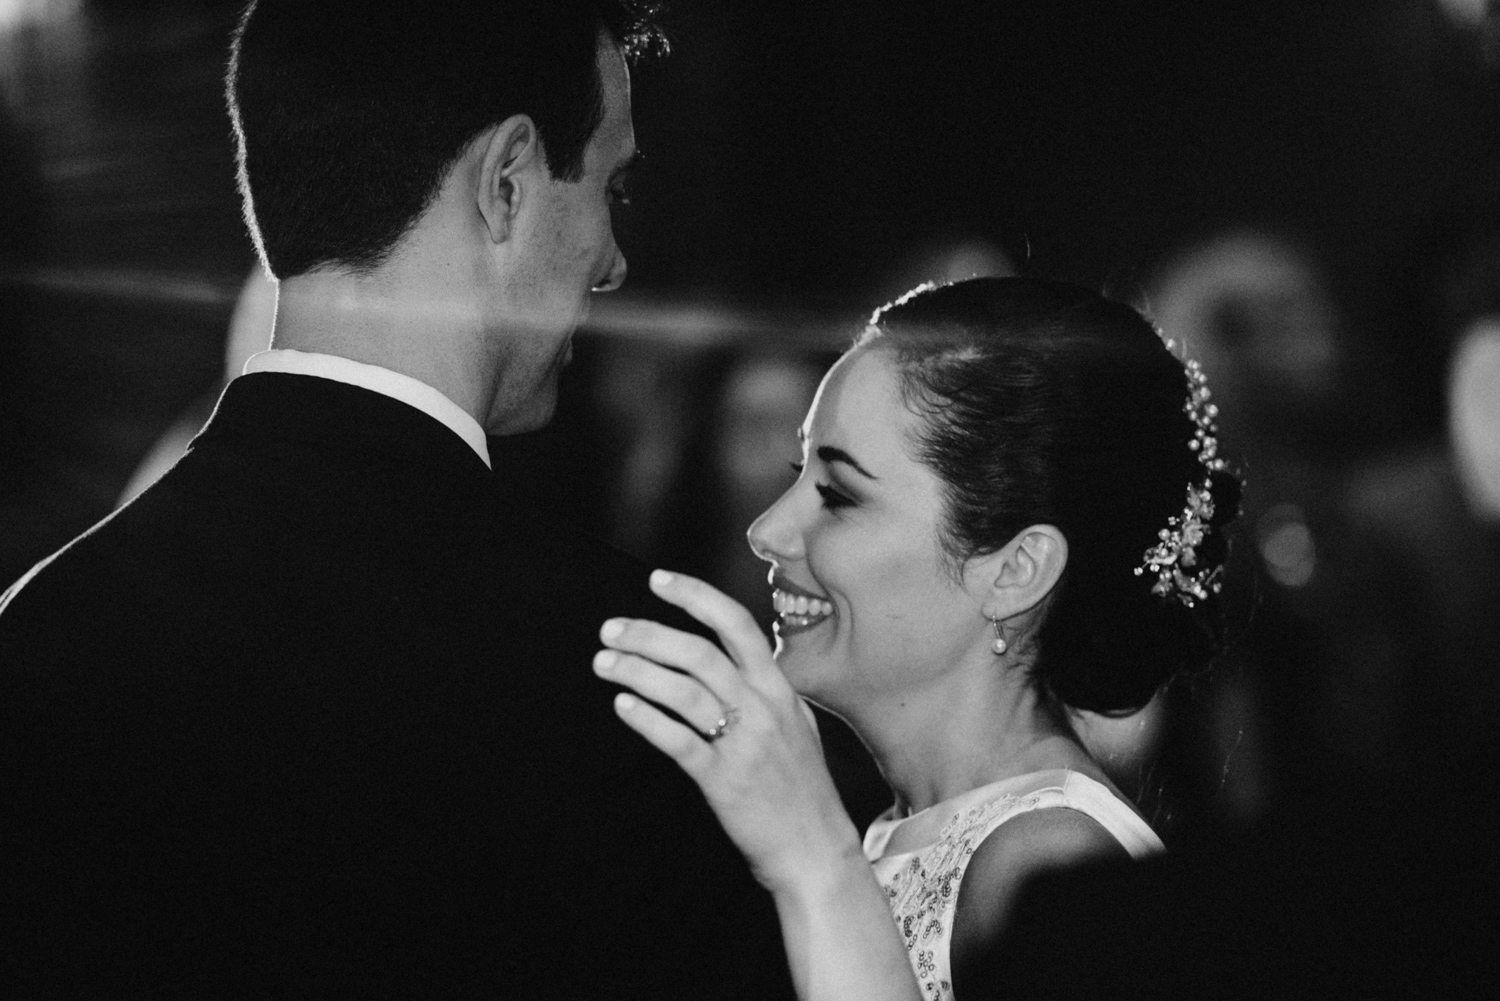 A bride and groom sharing their first dance at a Dupont Circle wedding in Washington DC.